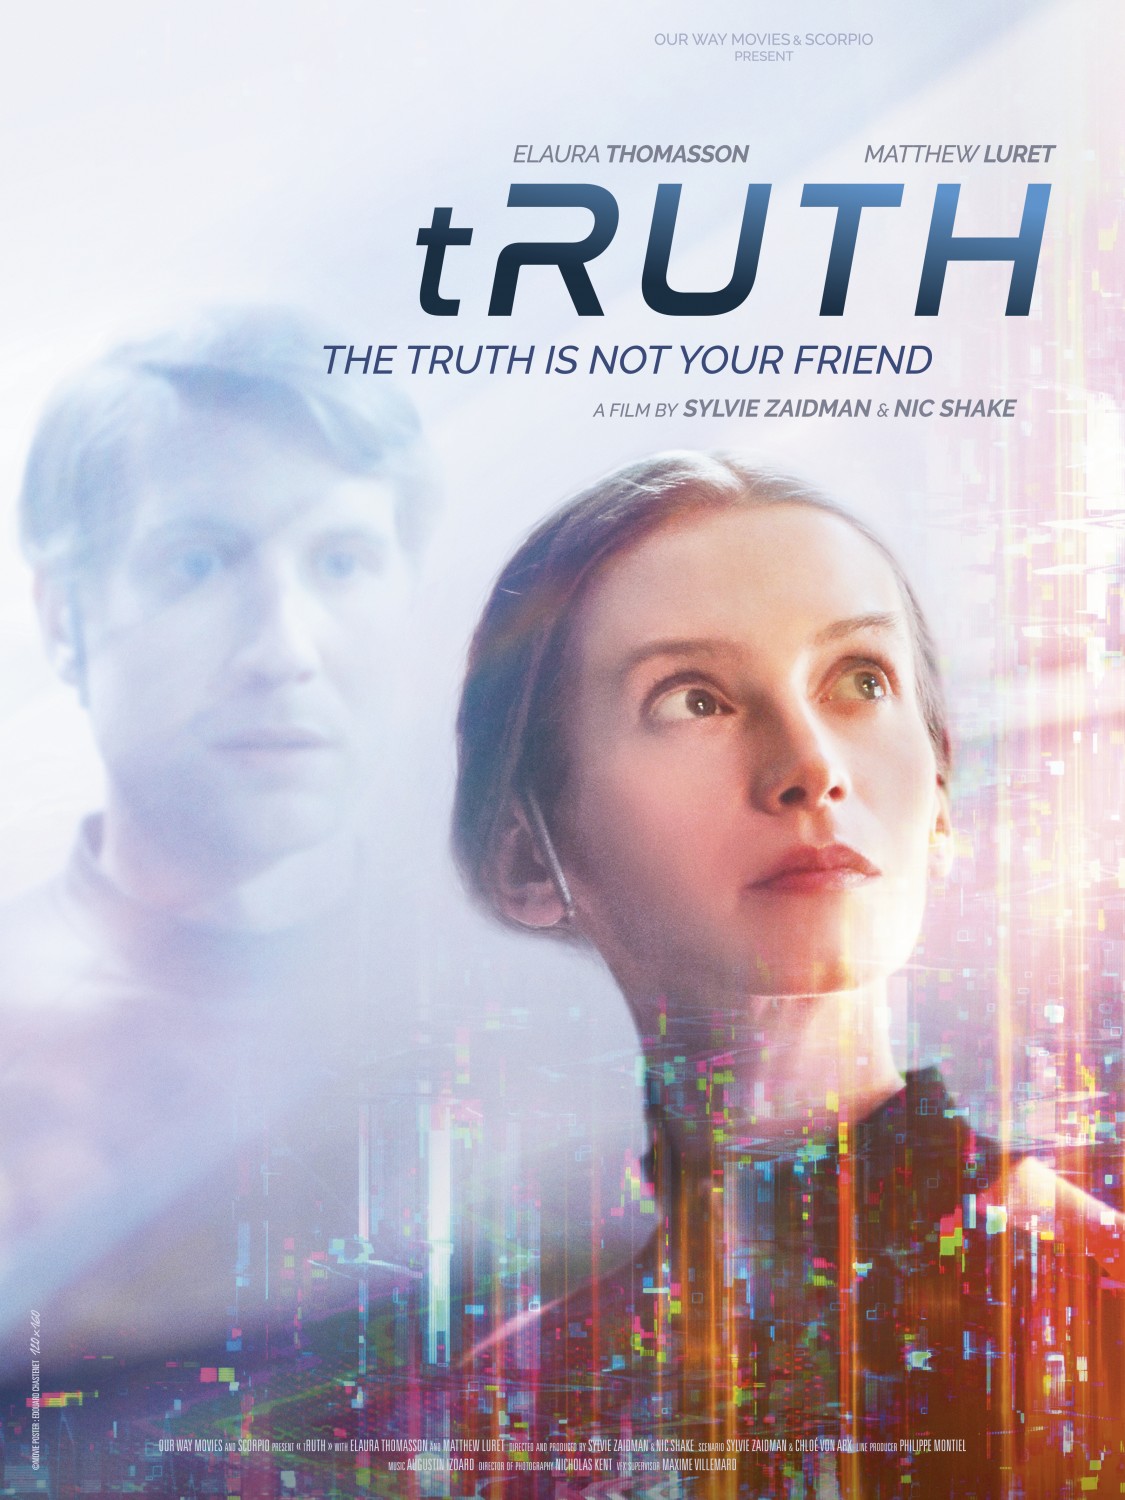 Extra Large Movie Poster Image for tRUTH